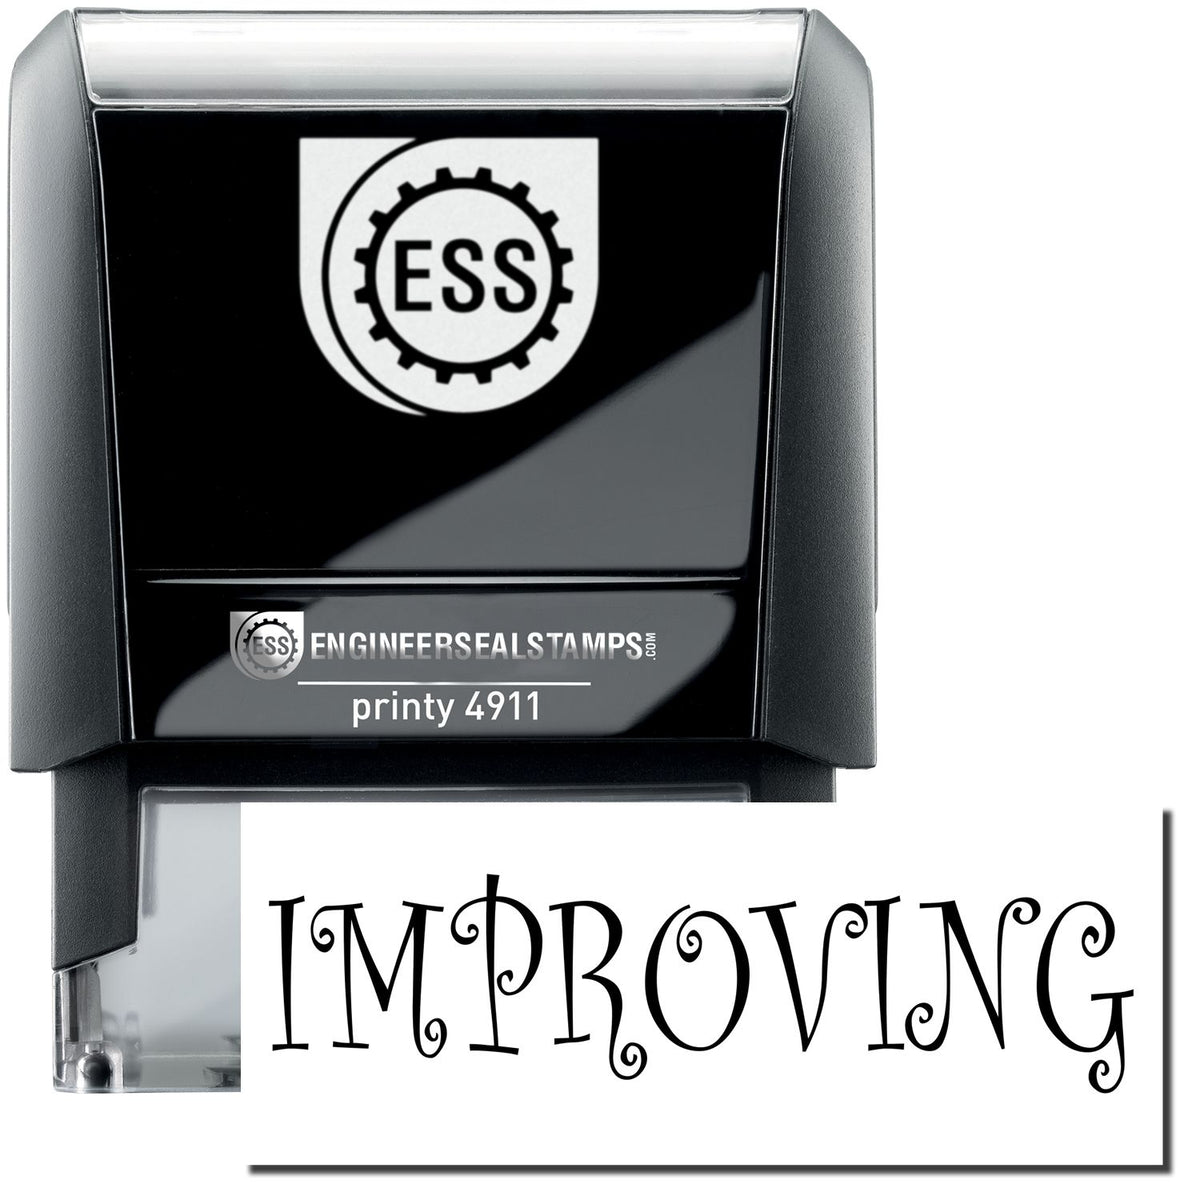 A self-inking stamp with a stamped image showing how the text &quot;IMPROVING&quot; is displayed after stamping.